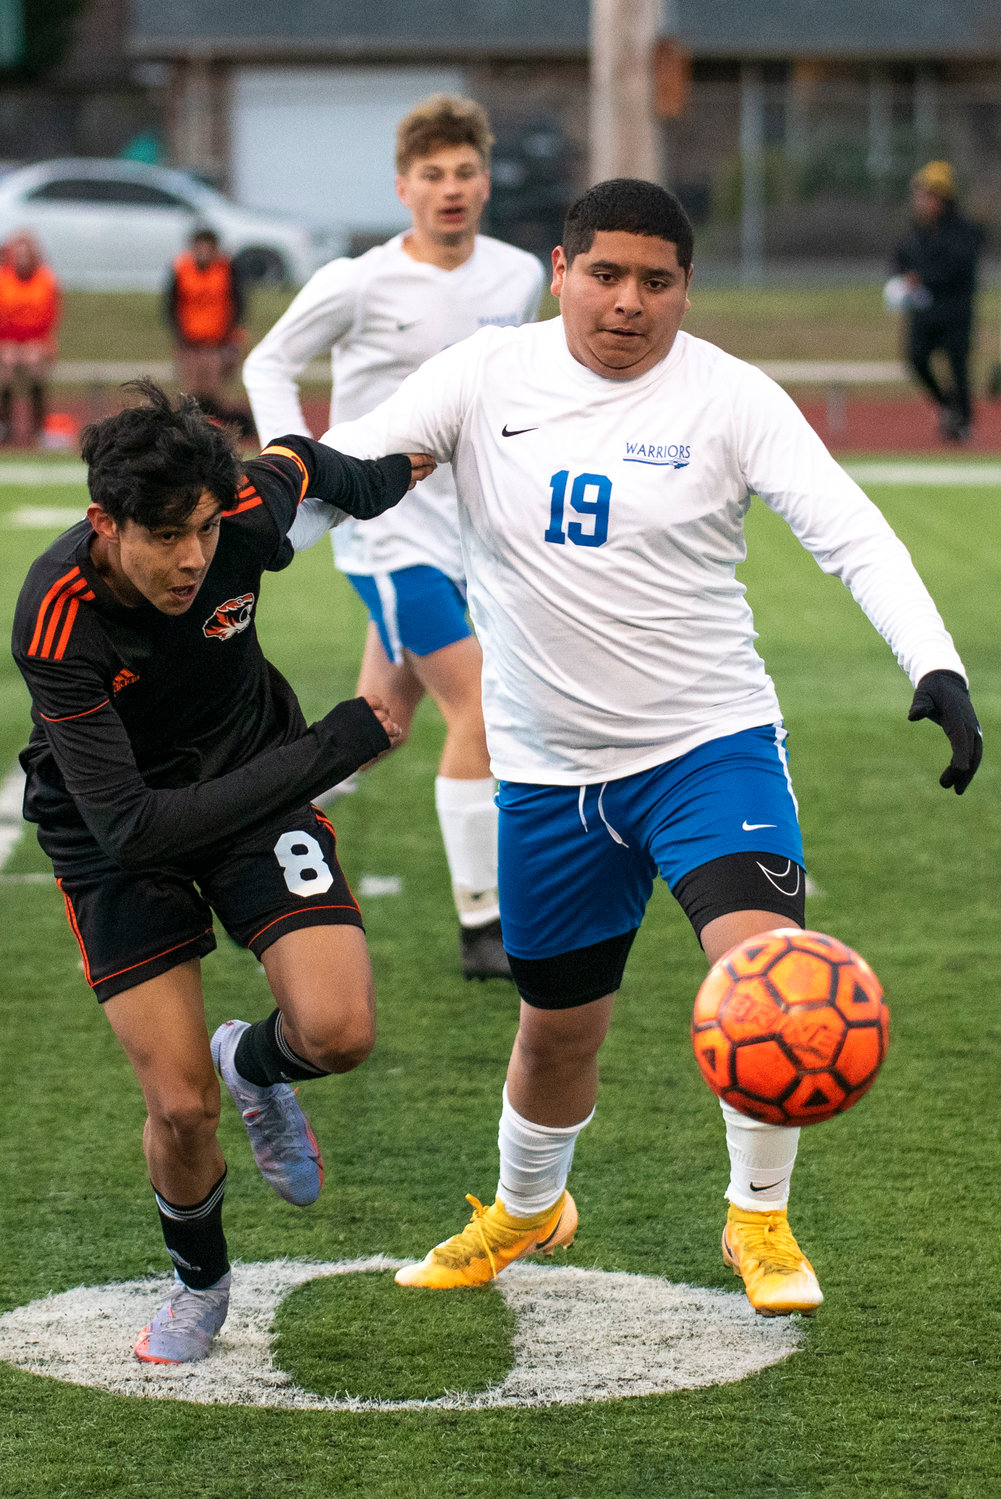 Centralia's Fernando Lopez (8) and Rochester's Ivoc Castillo (19) battle for the ball during a league game in Centralia on April 12.